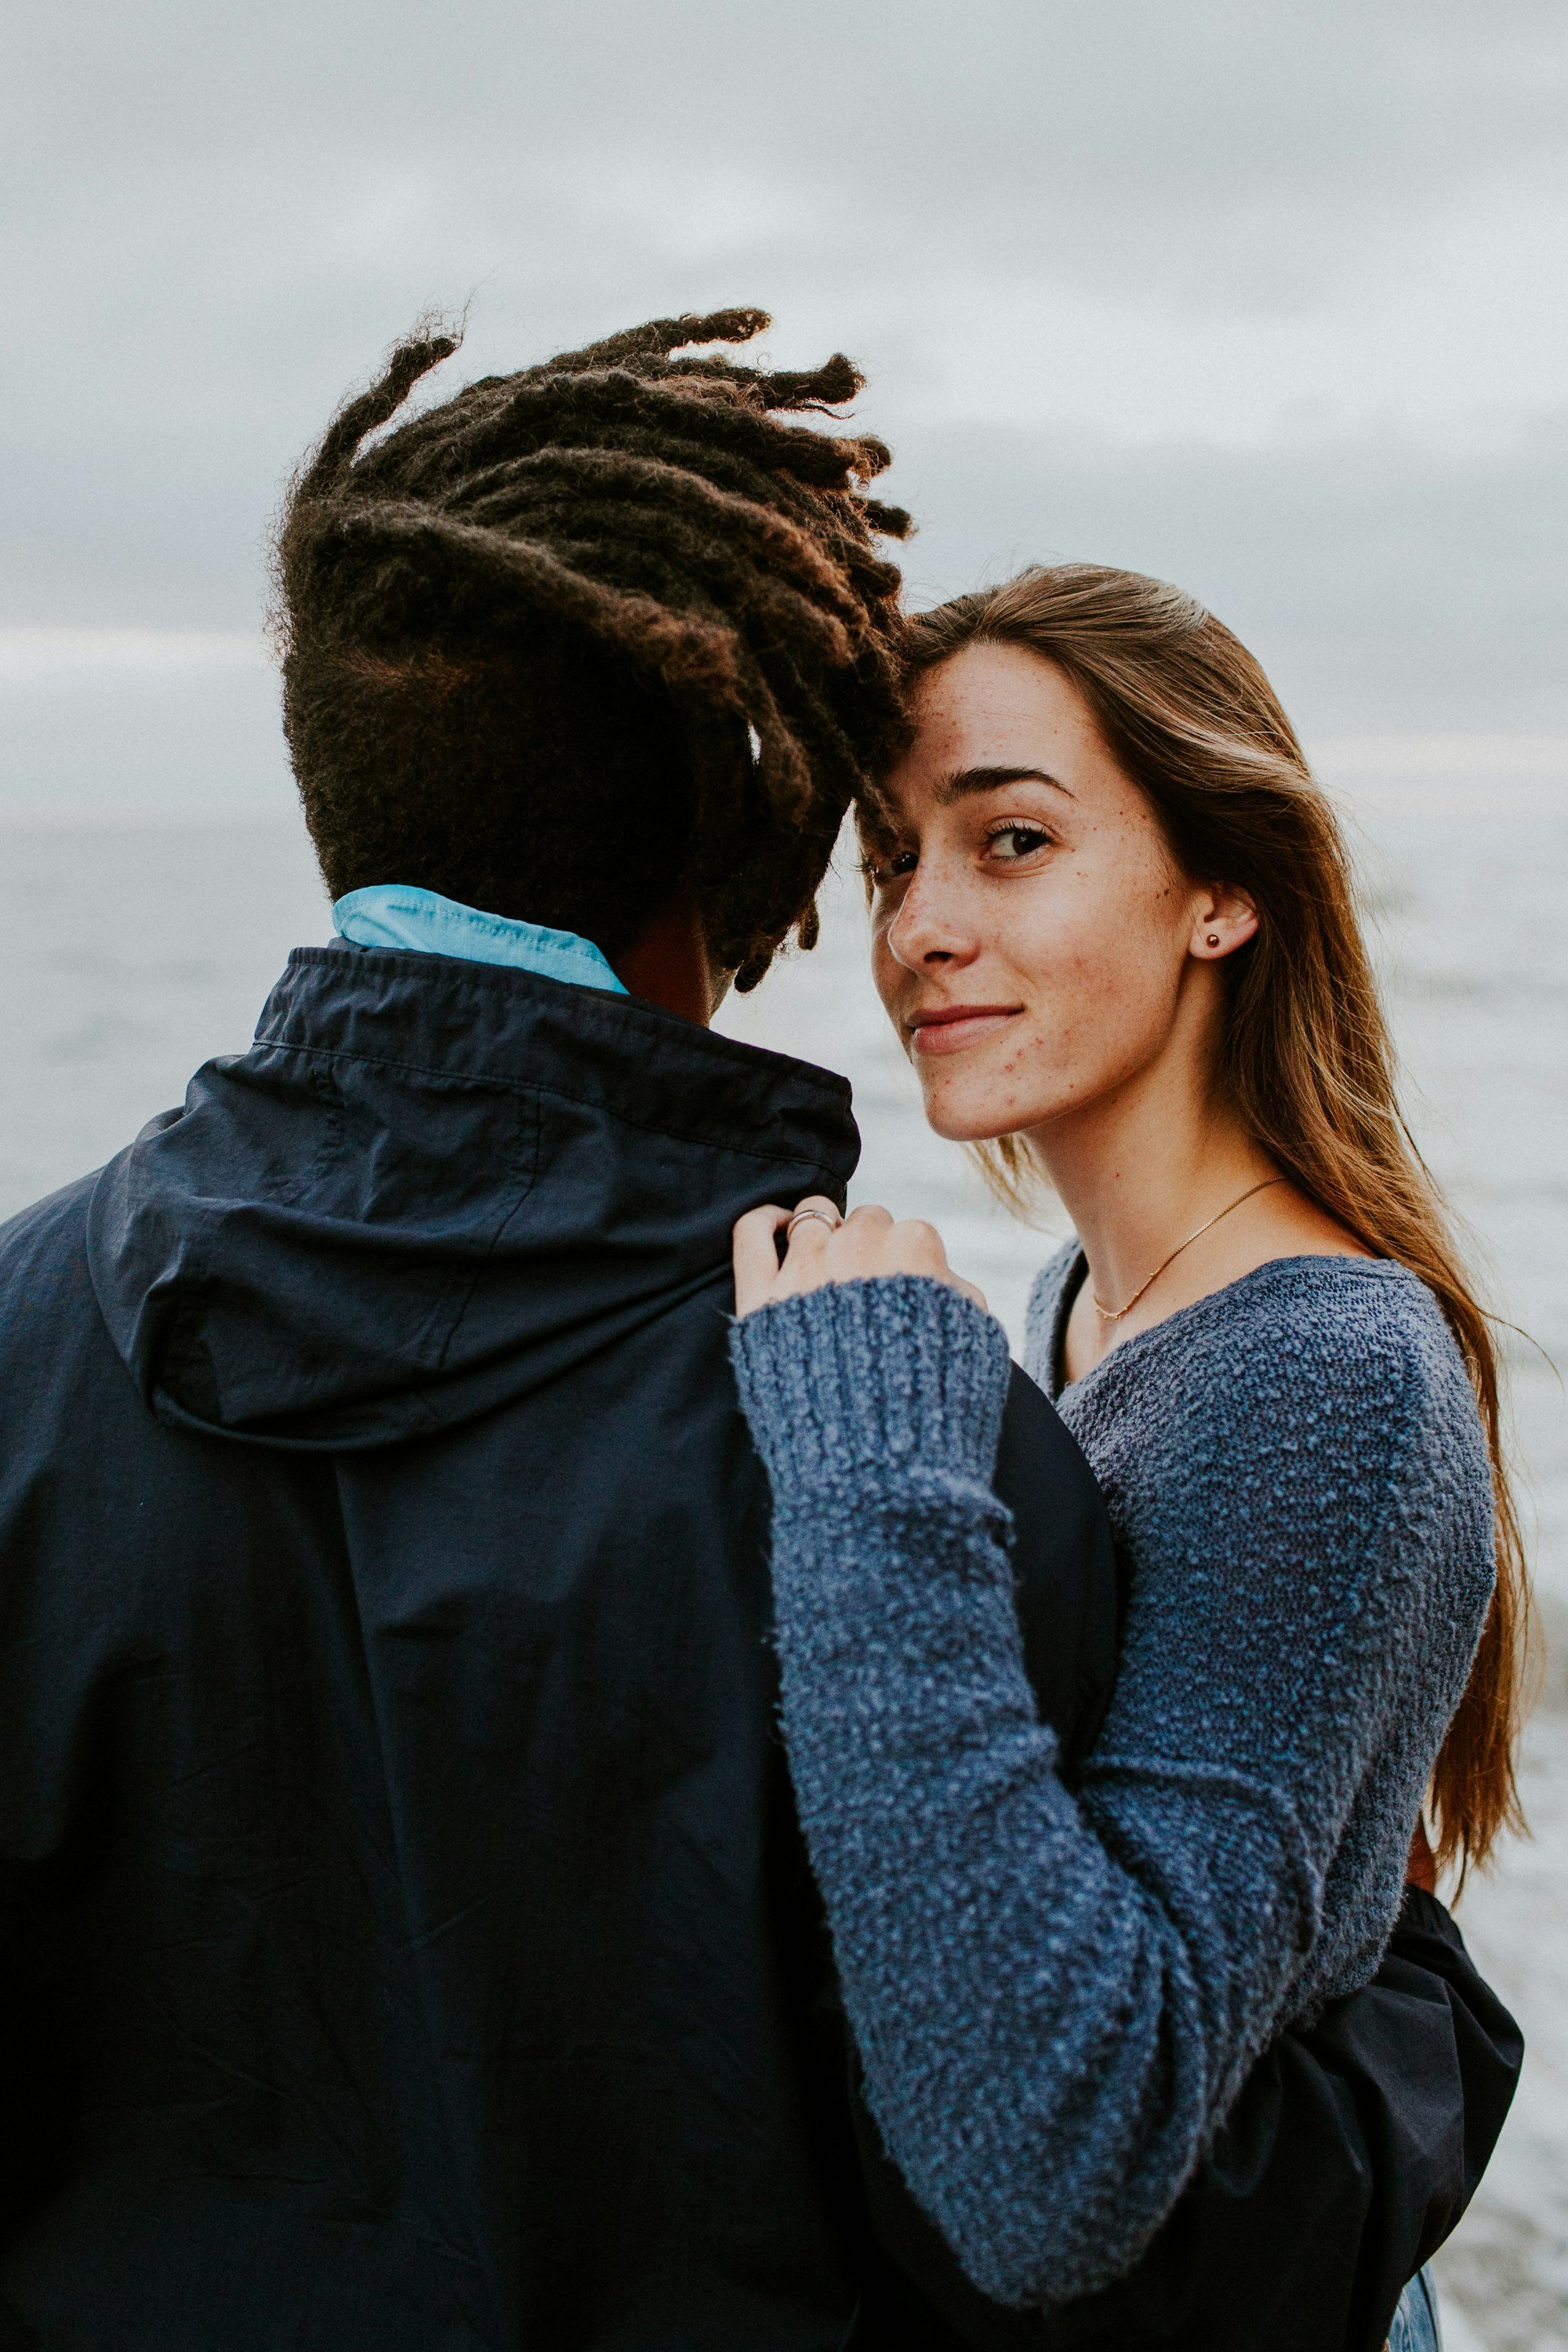 The Cultivation of Spiritual Connection in Relationships